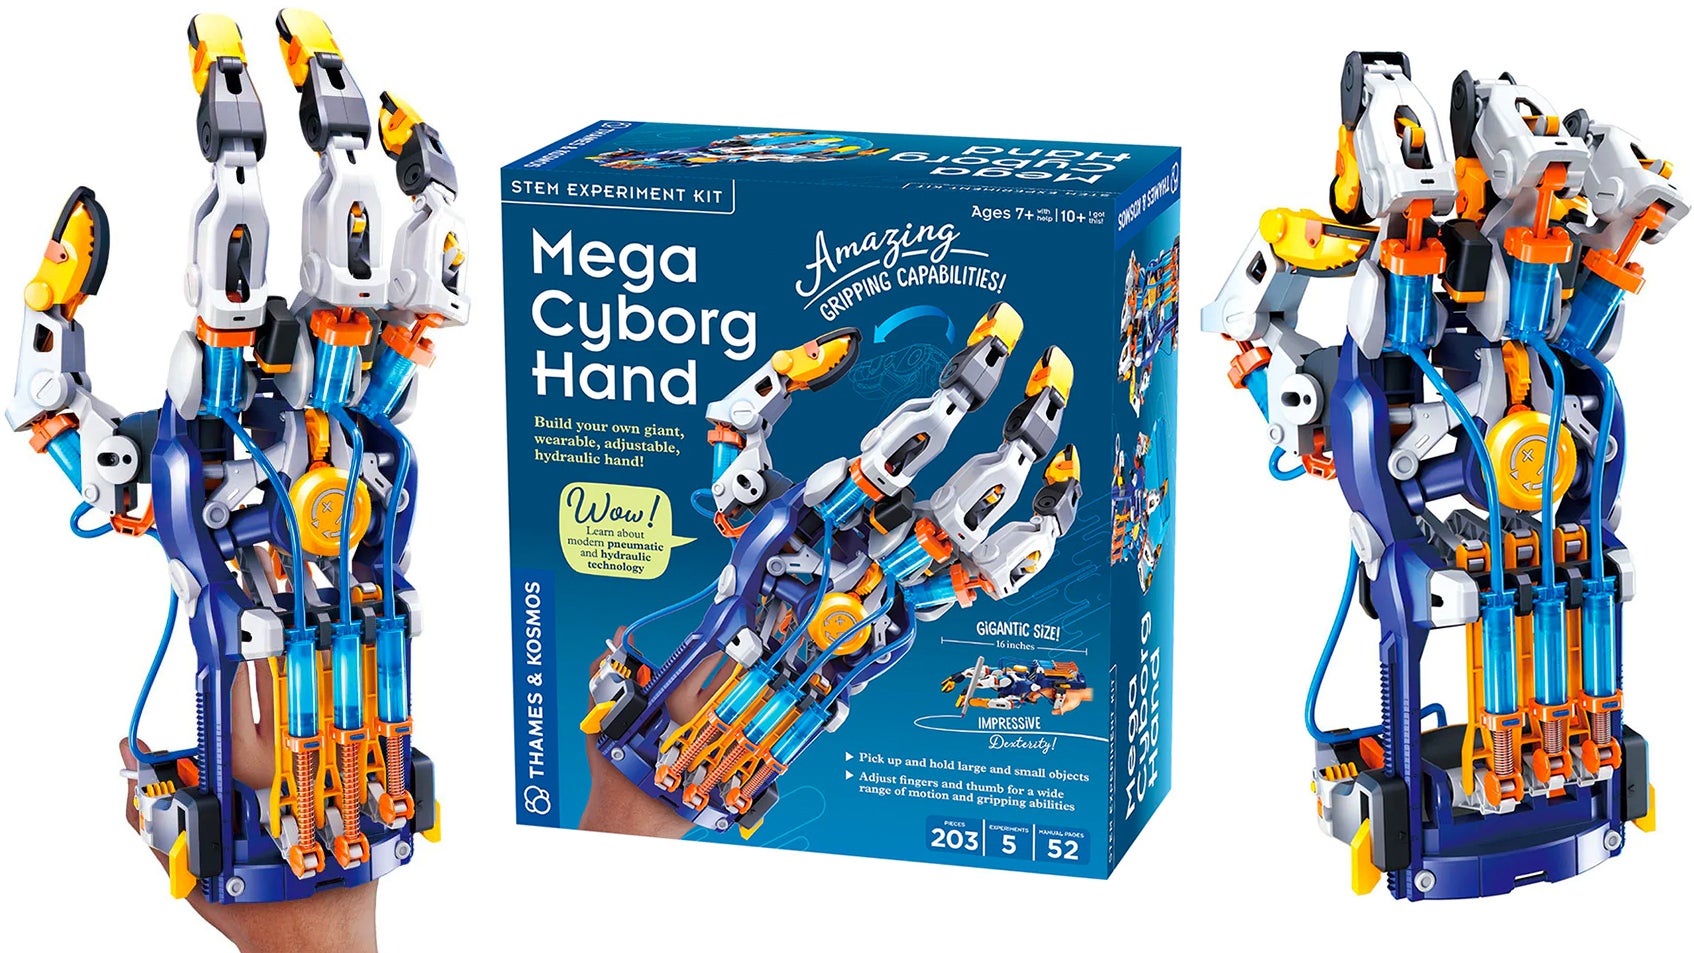 The Best Robotic STEM Toys to Fill The LEGO Mindstorms Hole in Your Heart